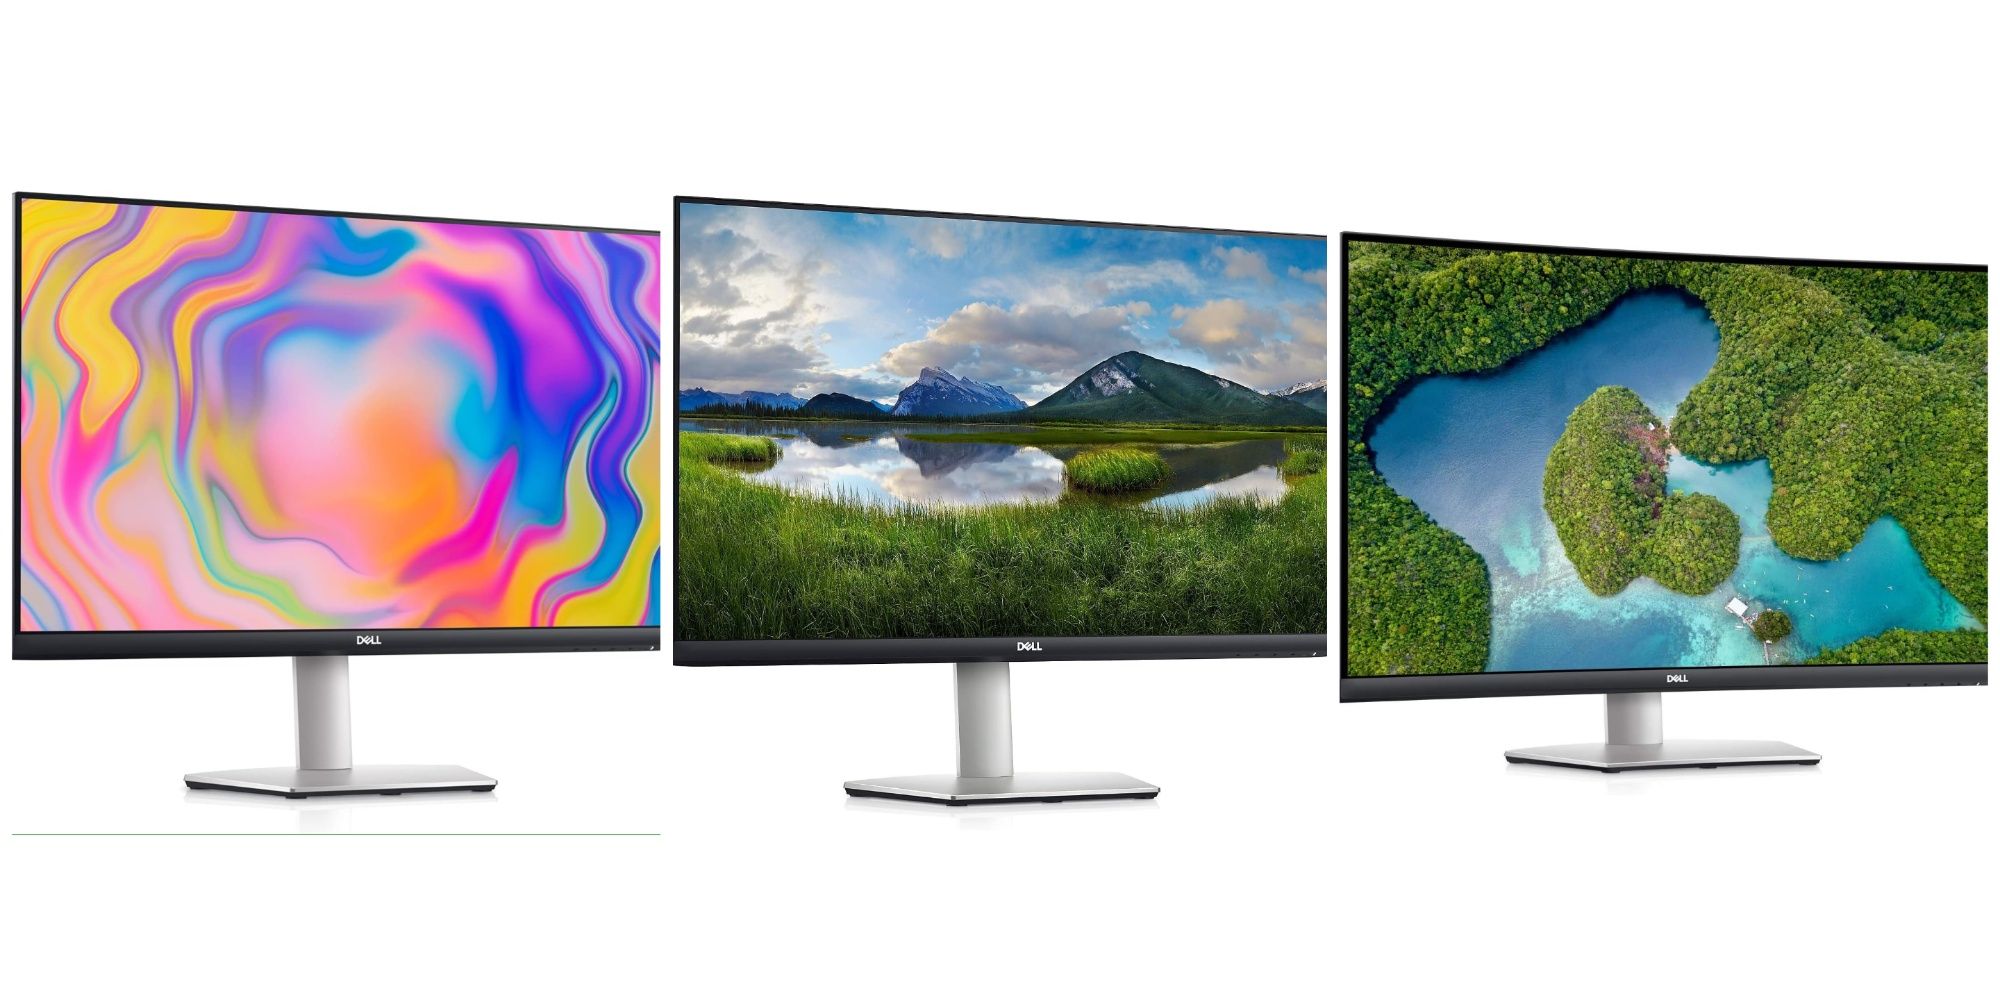 Three Dell monitors in a horizontal row, each with black bezels and a silver stand.